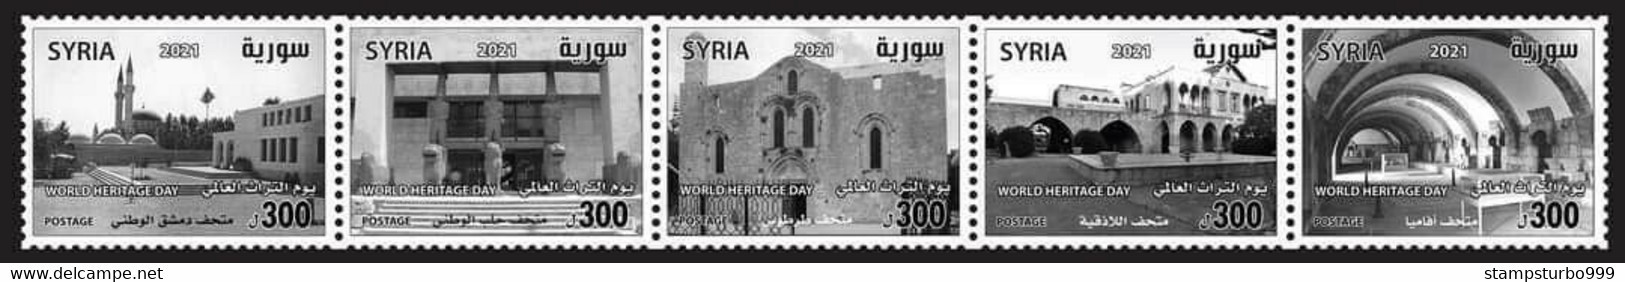 Syrie, Syrien, Syria 2021 New Issued World Heritage Day Set, MNH** - Syria